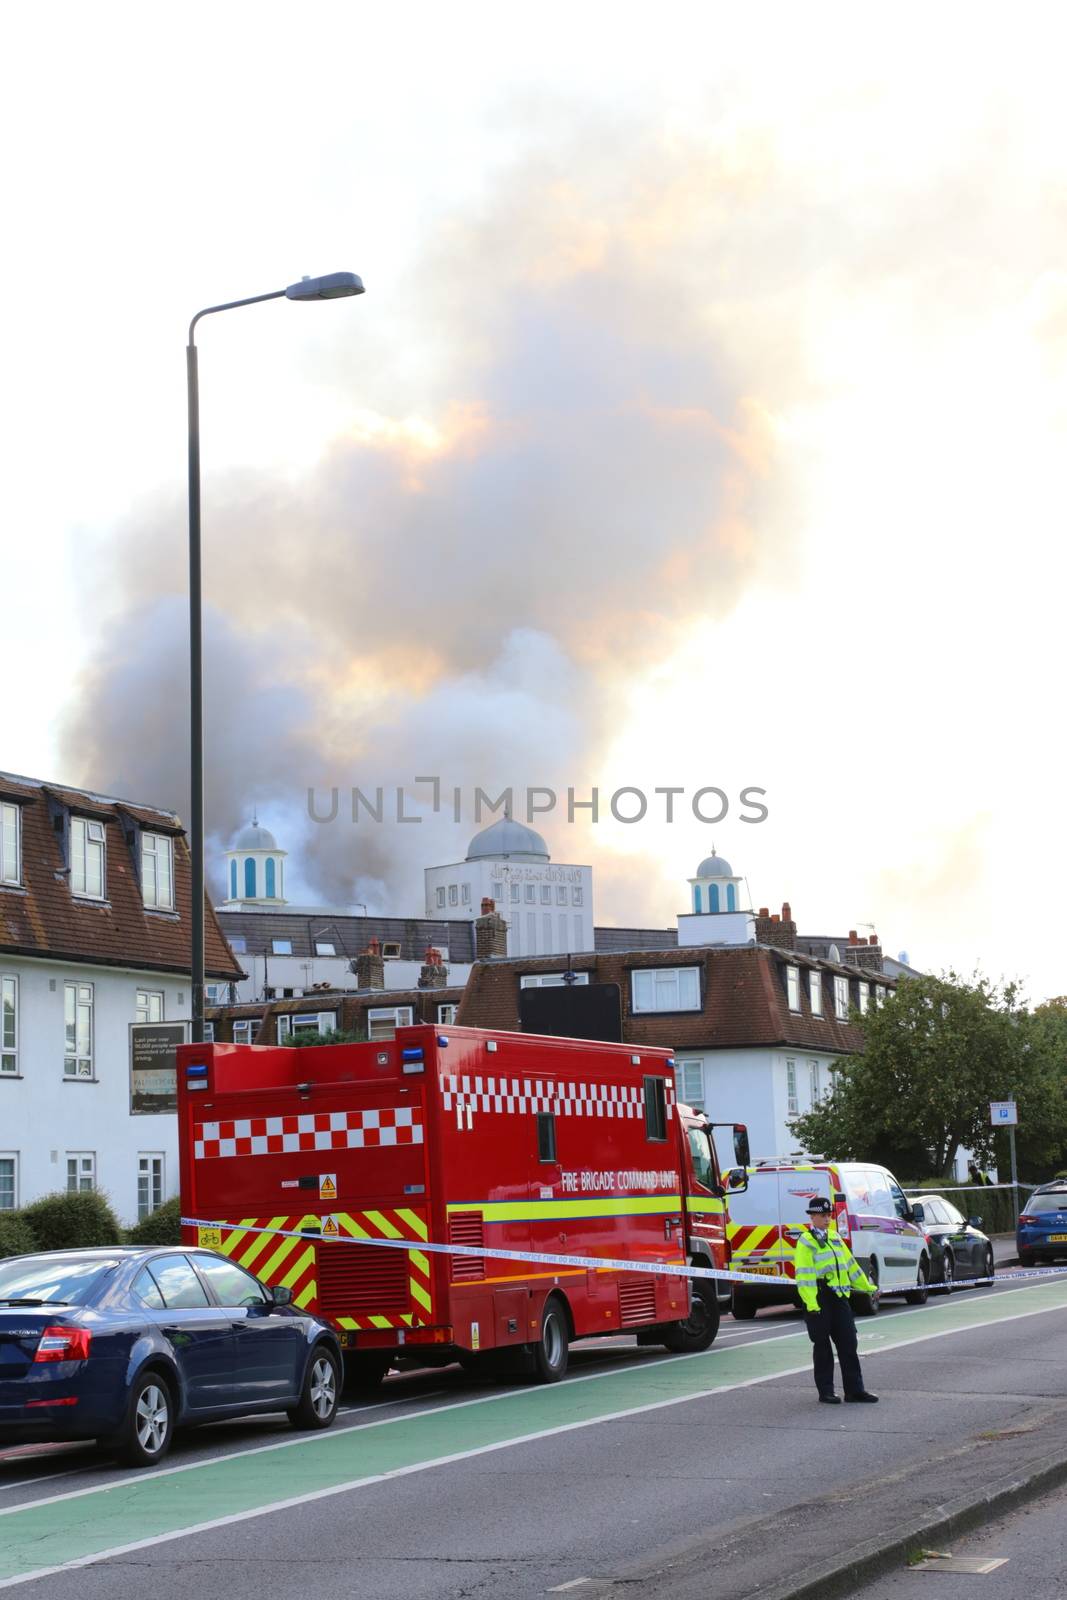 GREAT BRITAIN, London: Smoke rises from the Baitul Futuh Mosque in the Morden suburb of London, September 26, 2015.	The mosque, opened in 2003, is one of the biggest in western Europe and houses offices and a community centre. 